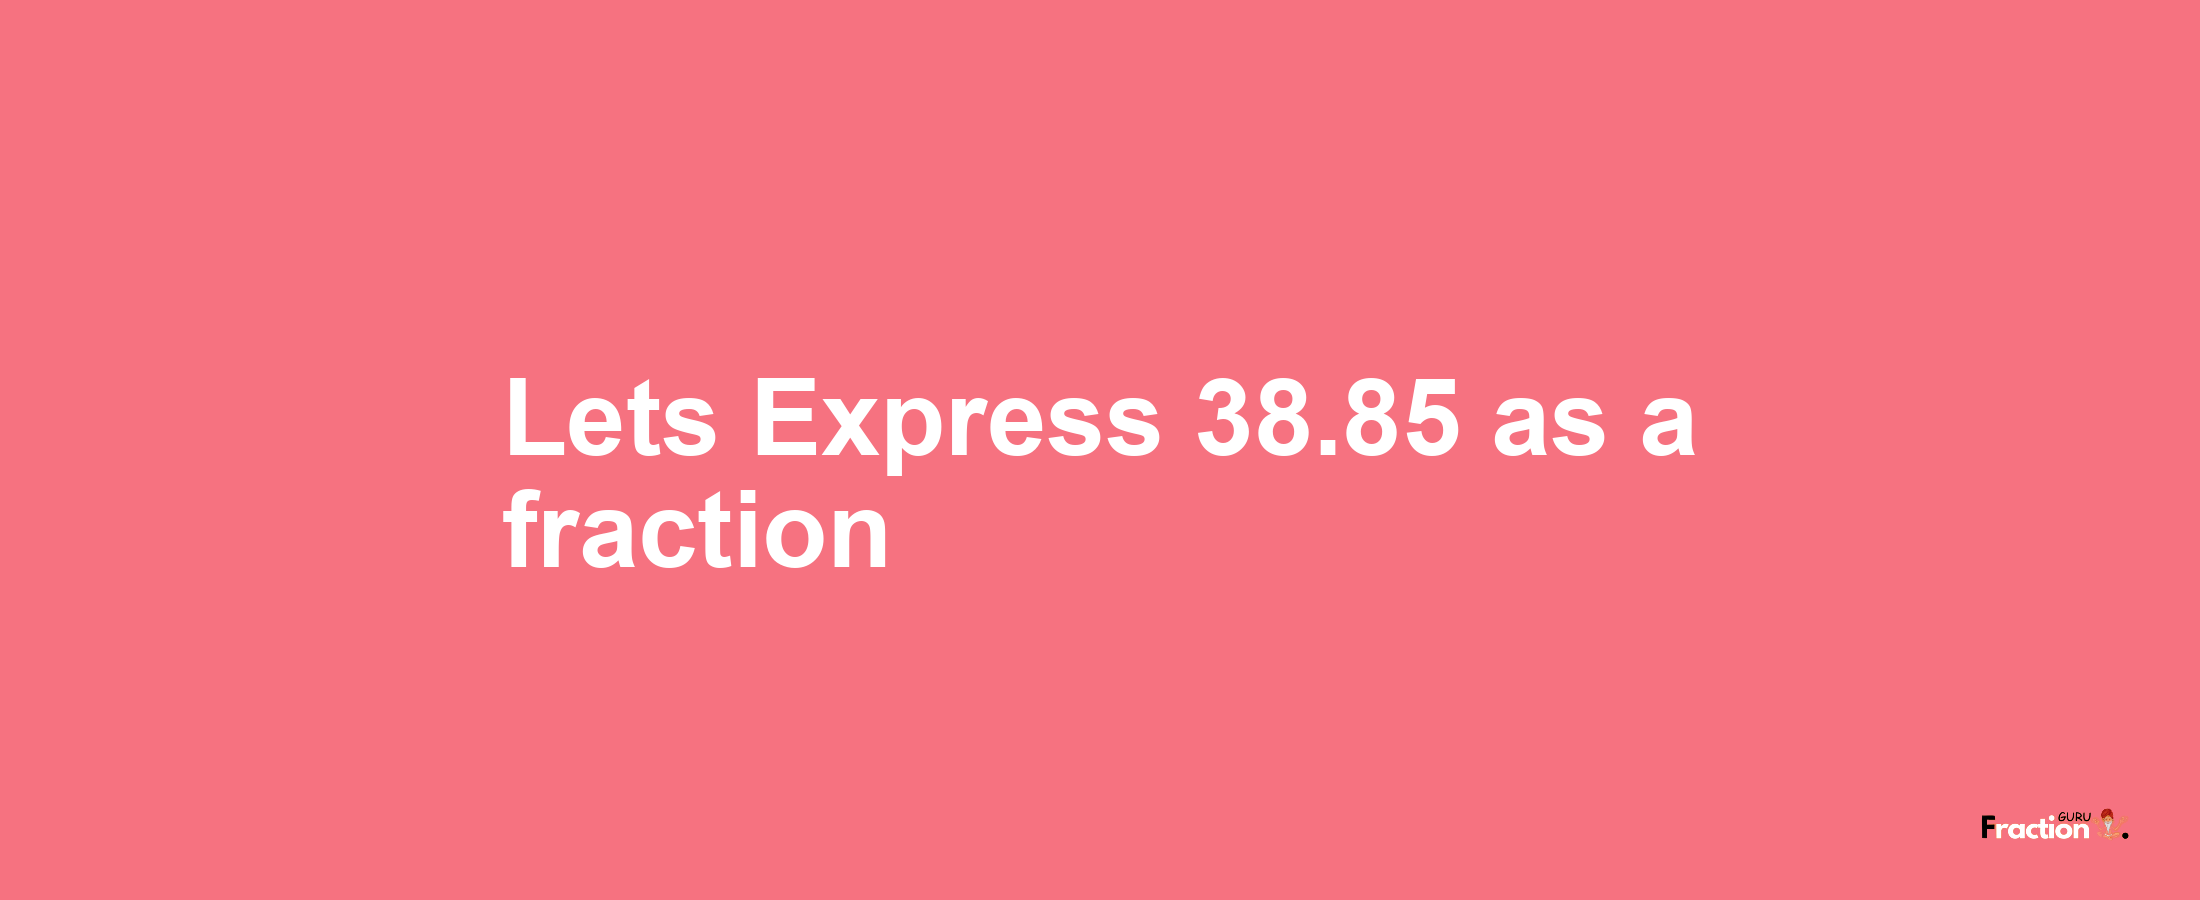 Lets Express 38.85 as afraction